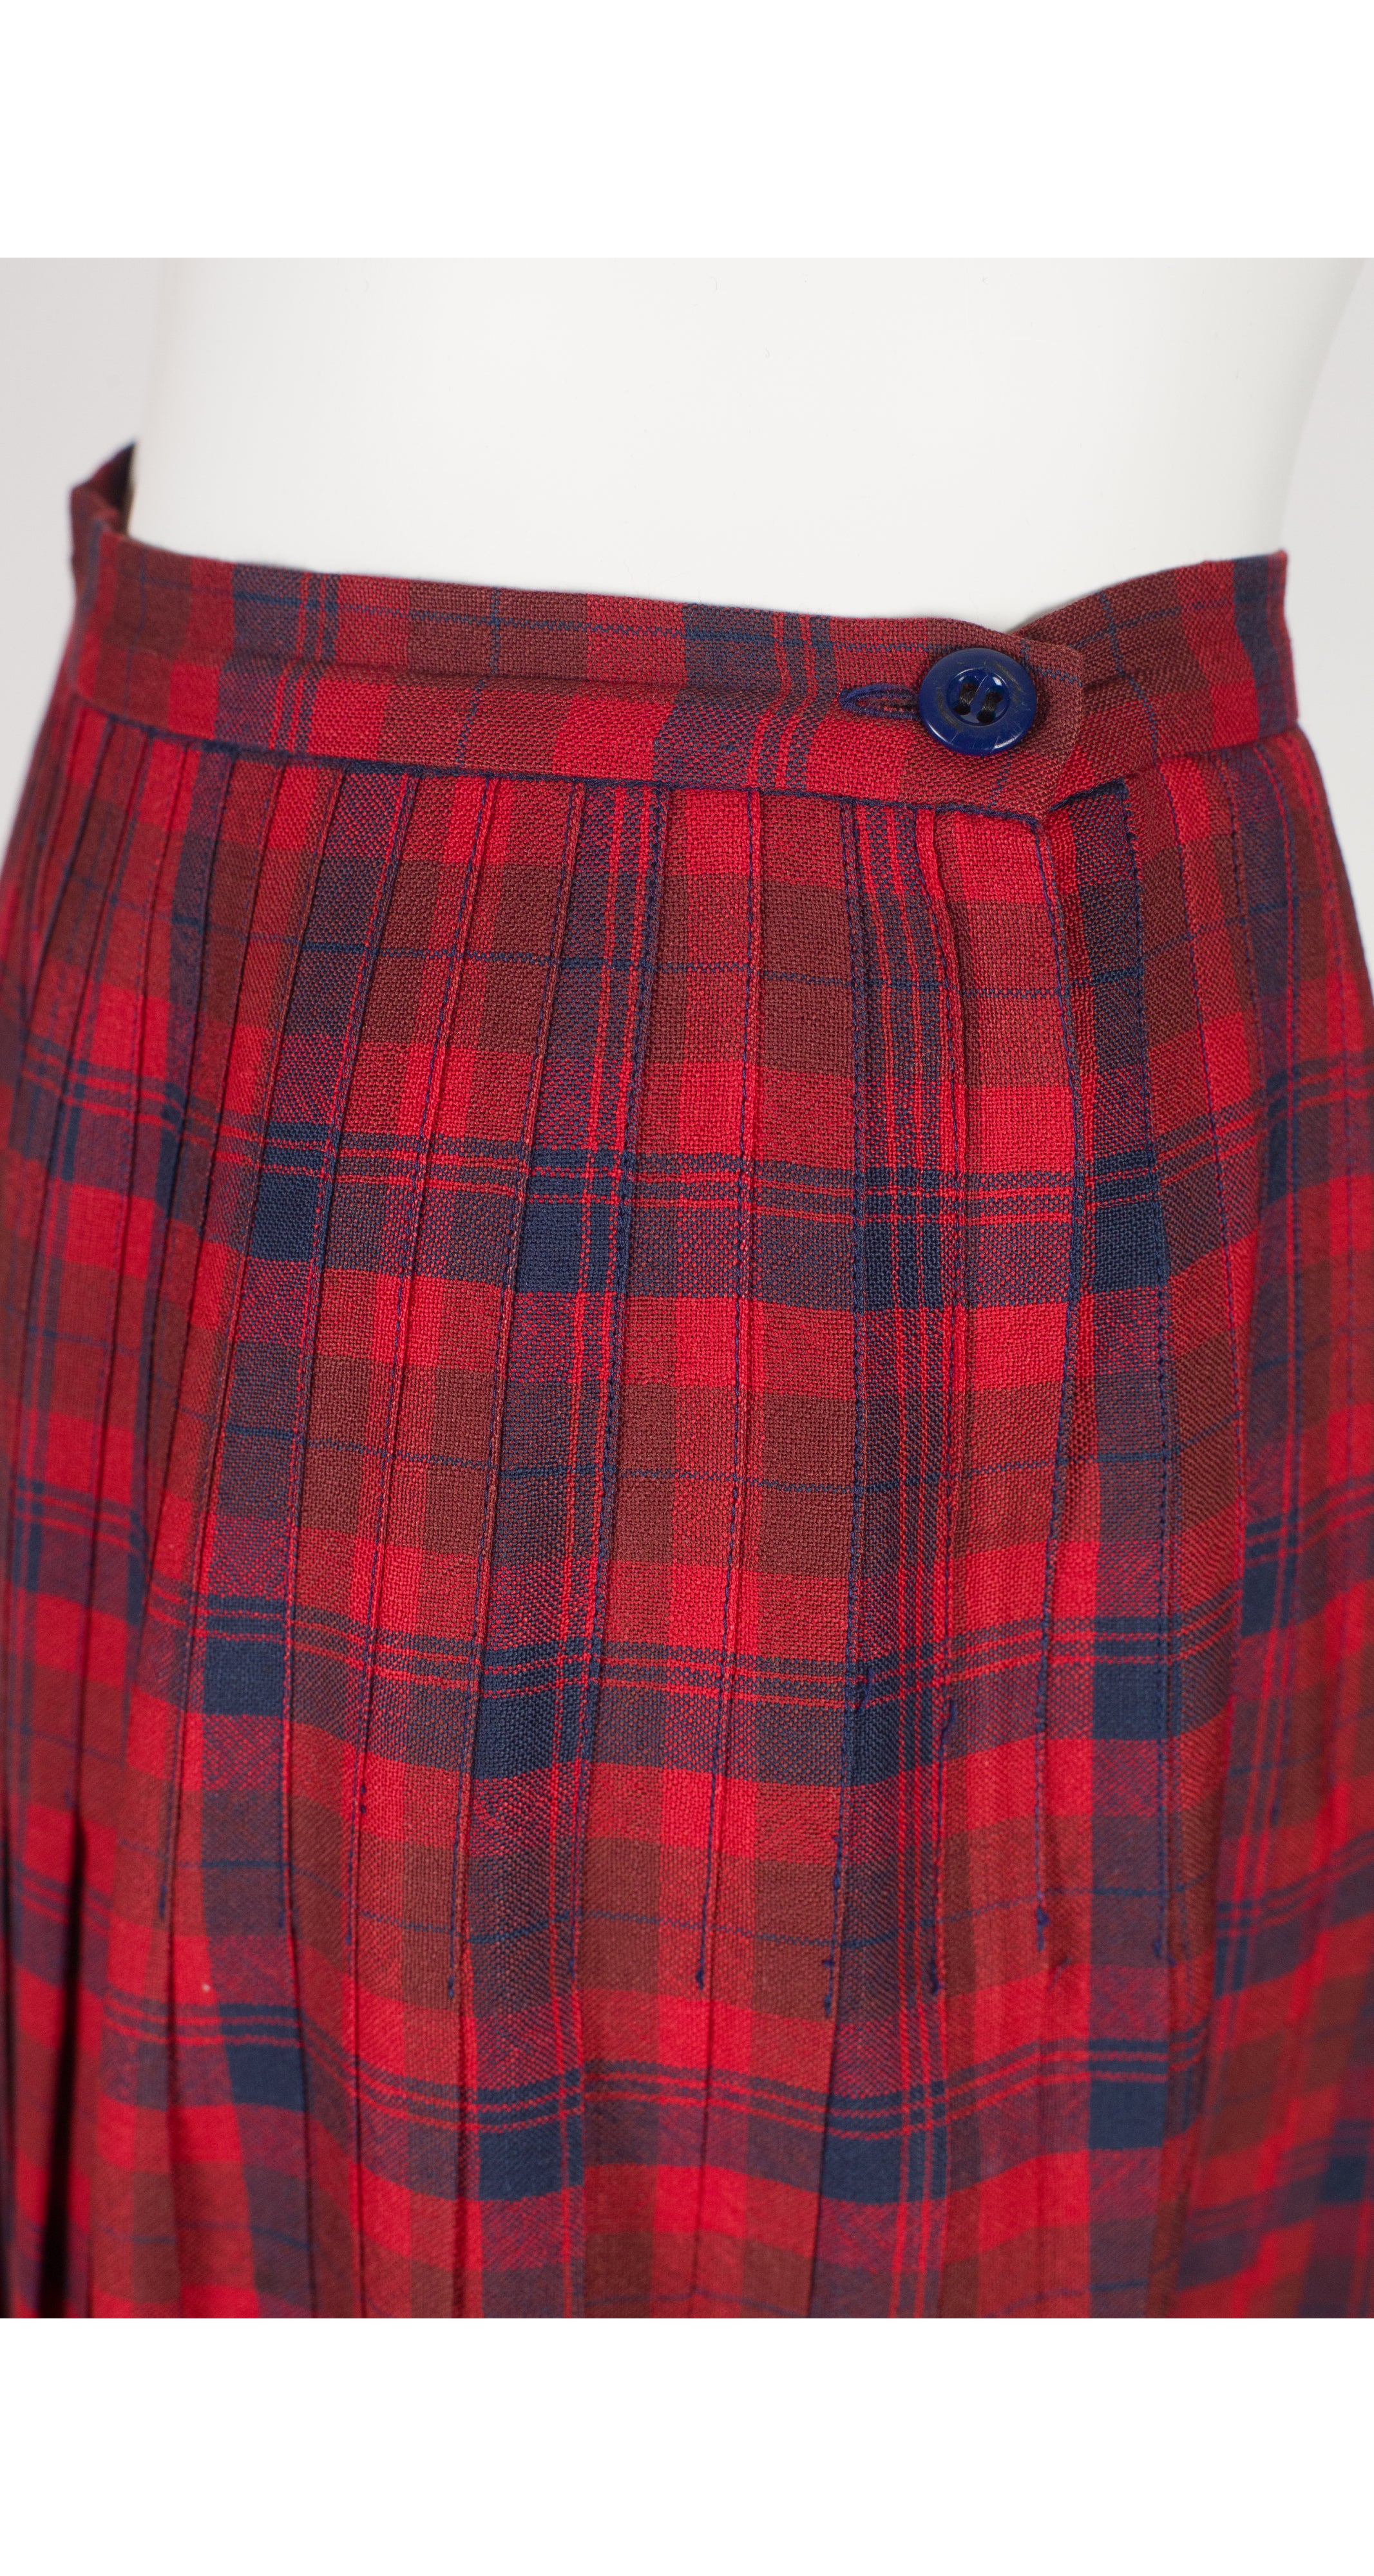 1970s Red Plaid Wool Pleated High-Waisted Skirt